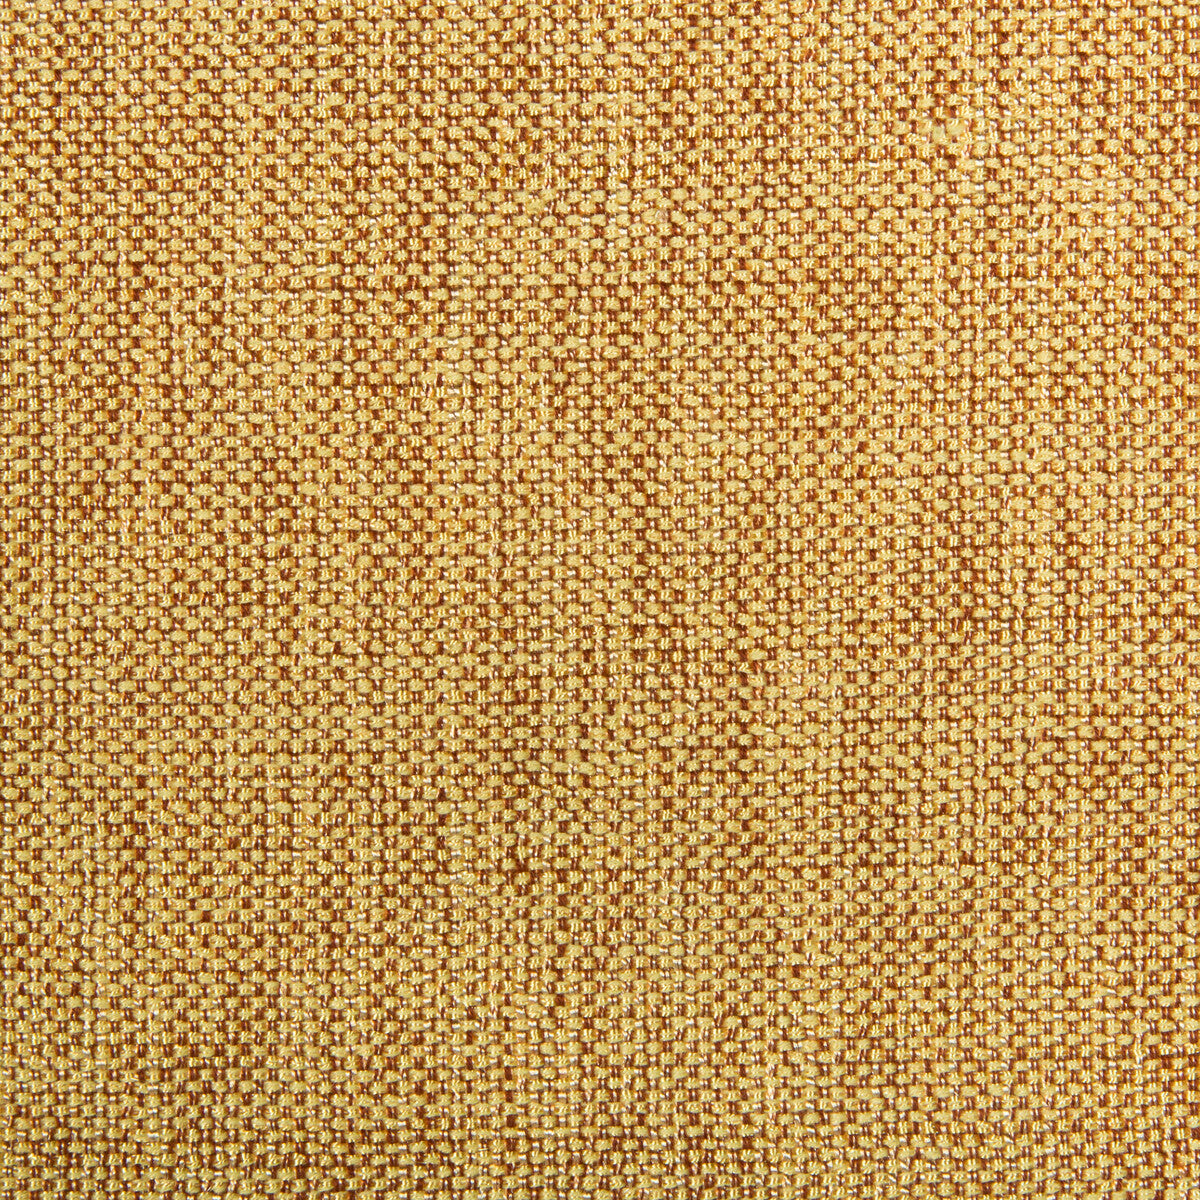 Kravet Contract fabric in 4458-1424 color - pattern 4458.1424.0 - by Kravet Contract